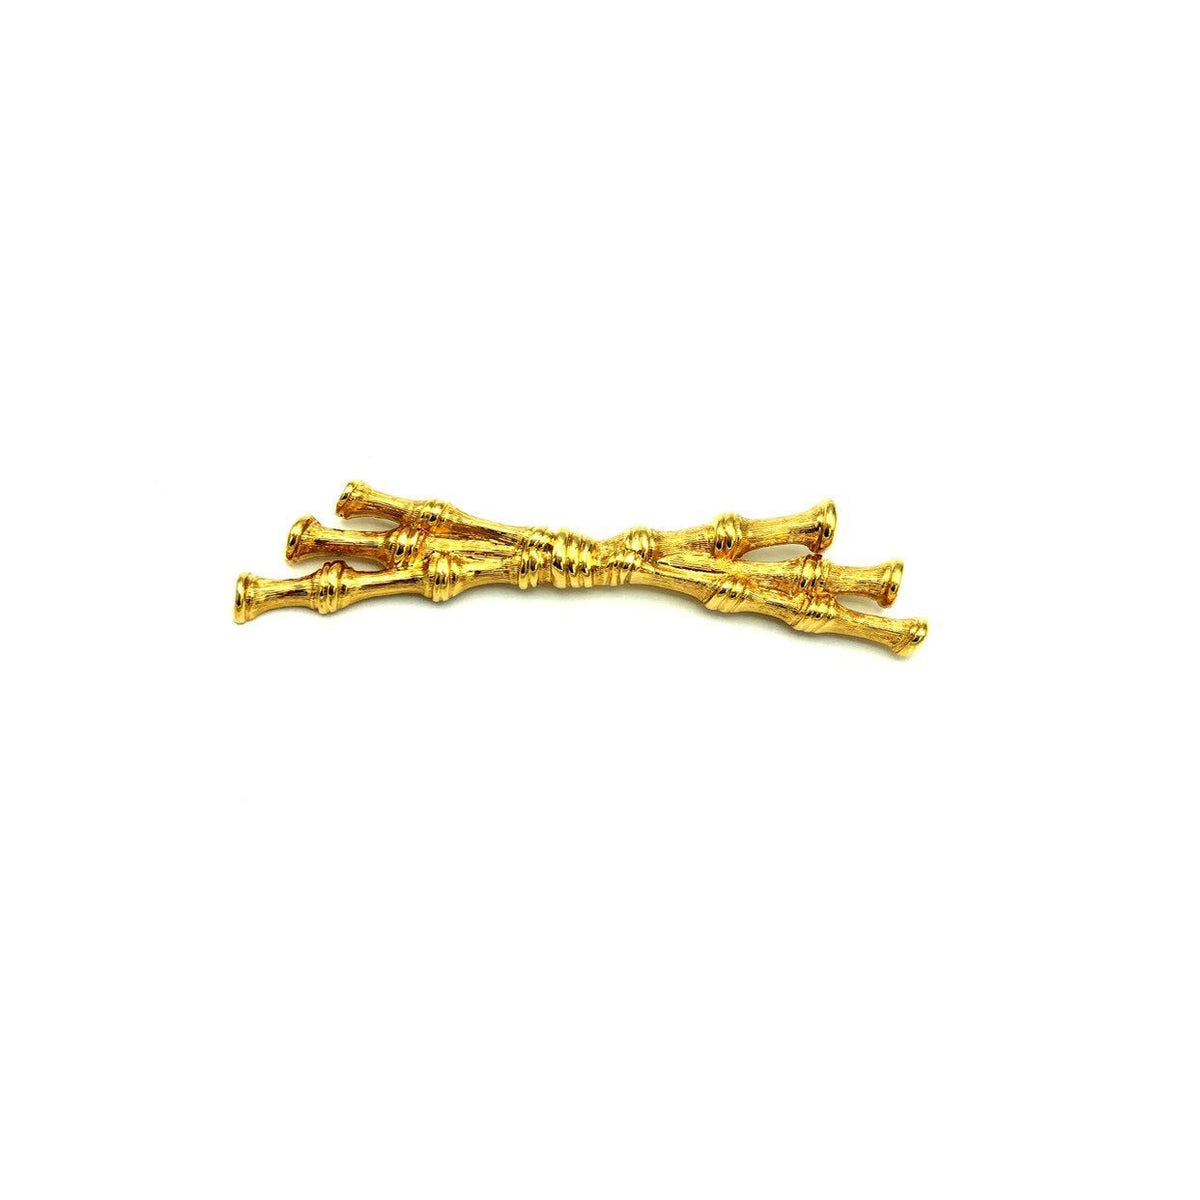 Monet Classic Gold Bamboo Vintage Bar Brooch - 24 Wishes Vintage Jewelry